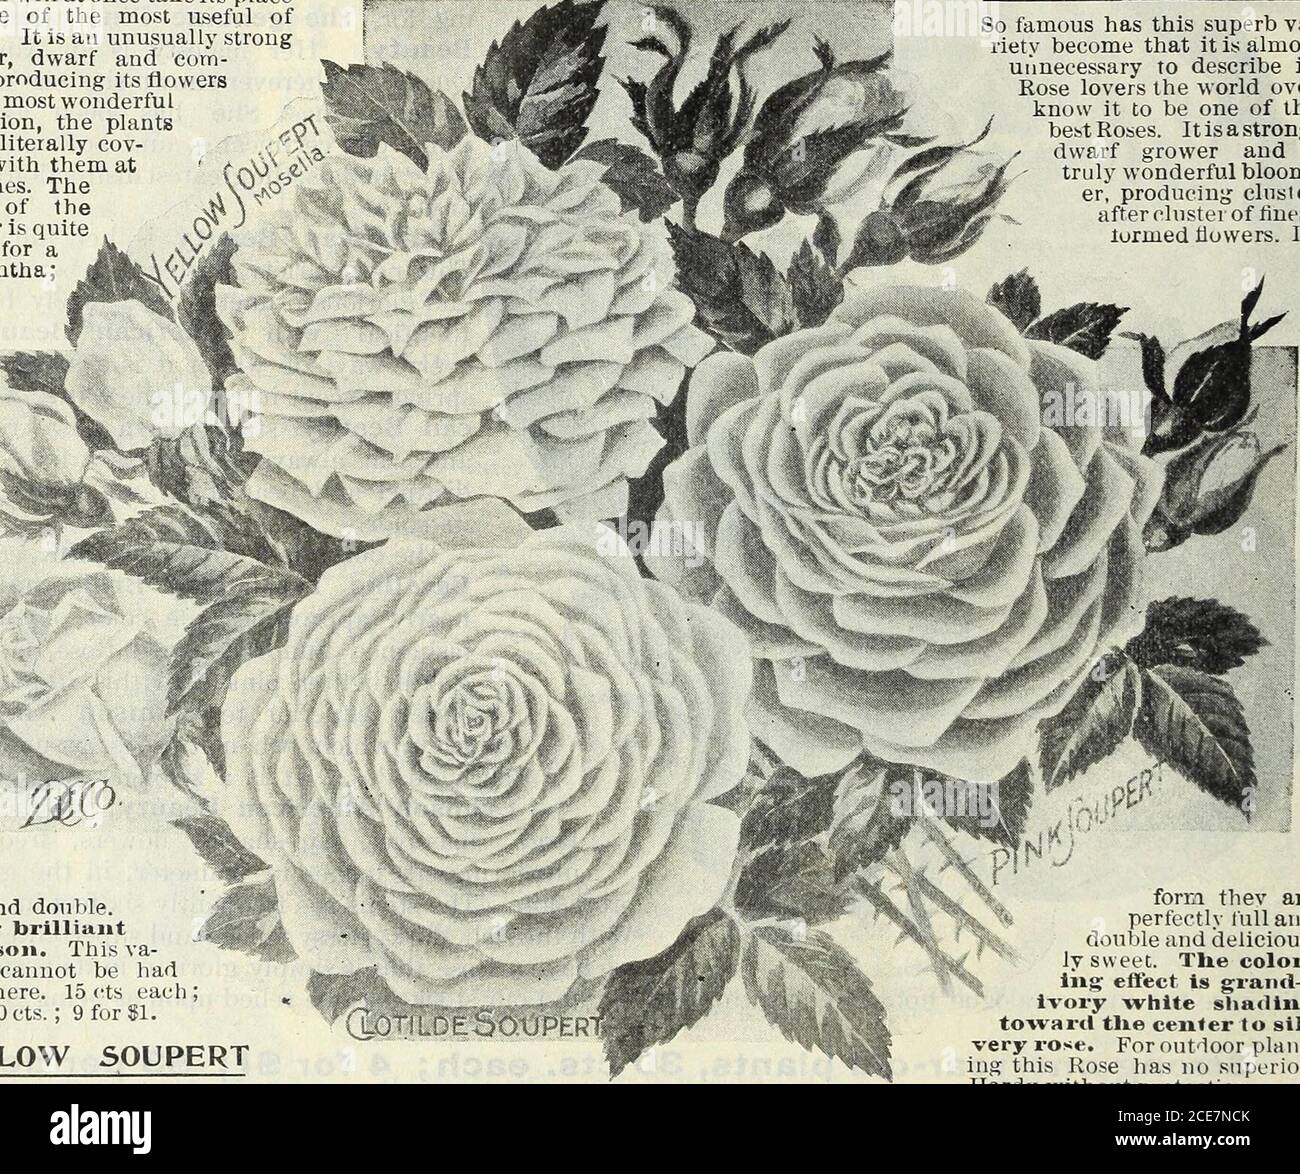 Our new guide to rose culture : typical D.&C. roses painted from